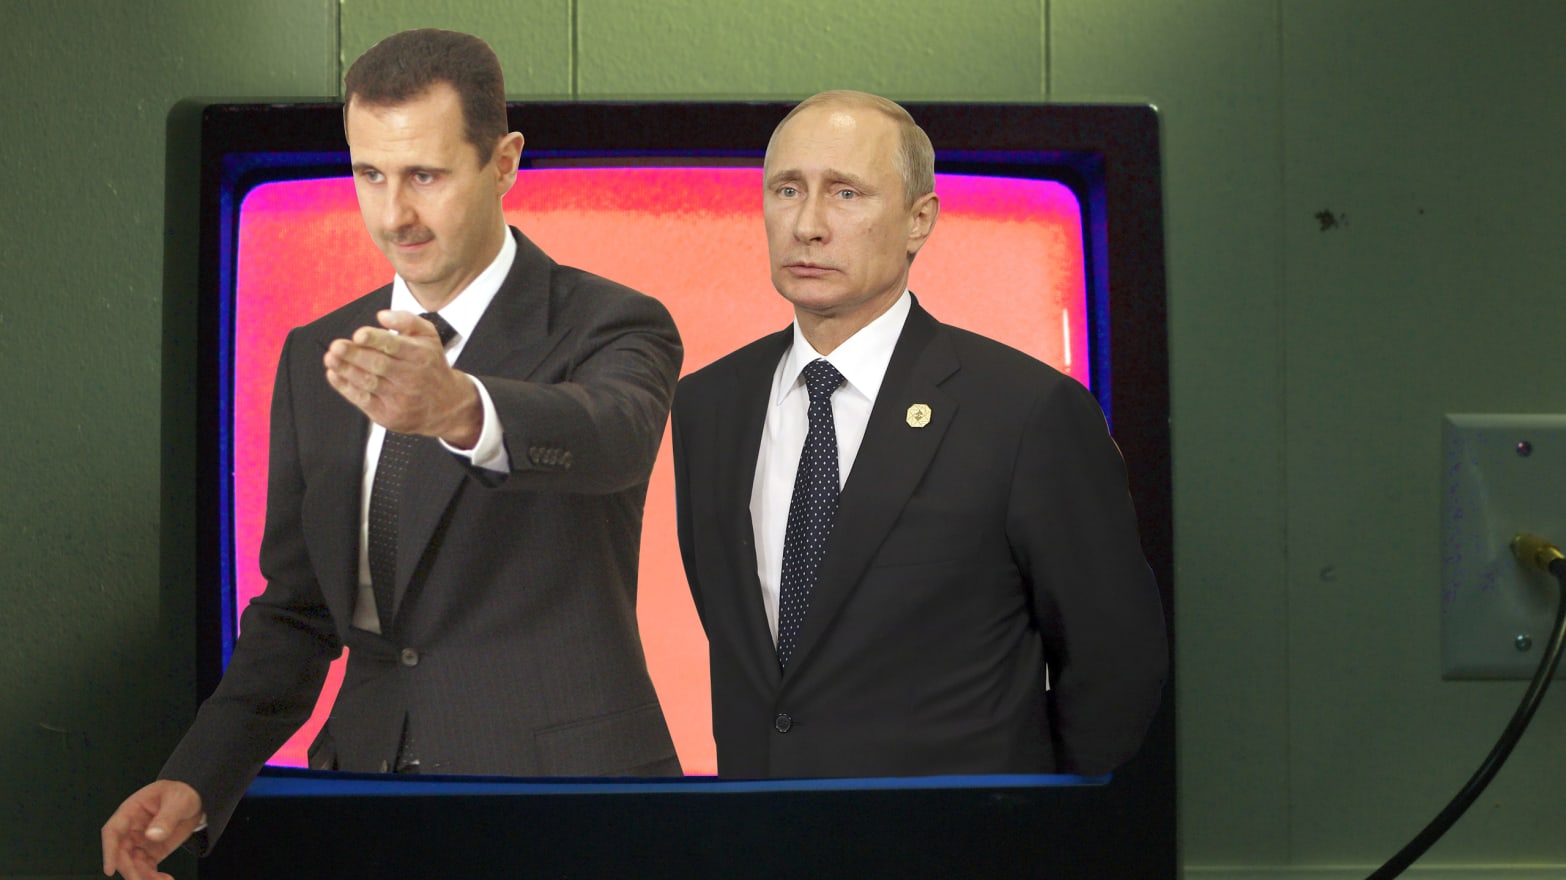 Digital Doublethink: Playing Truth or Dare with Putin and Assad